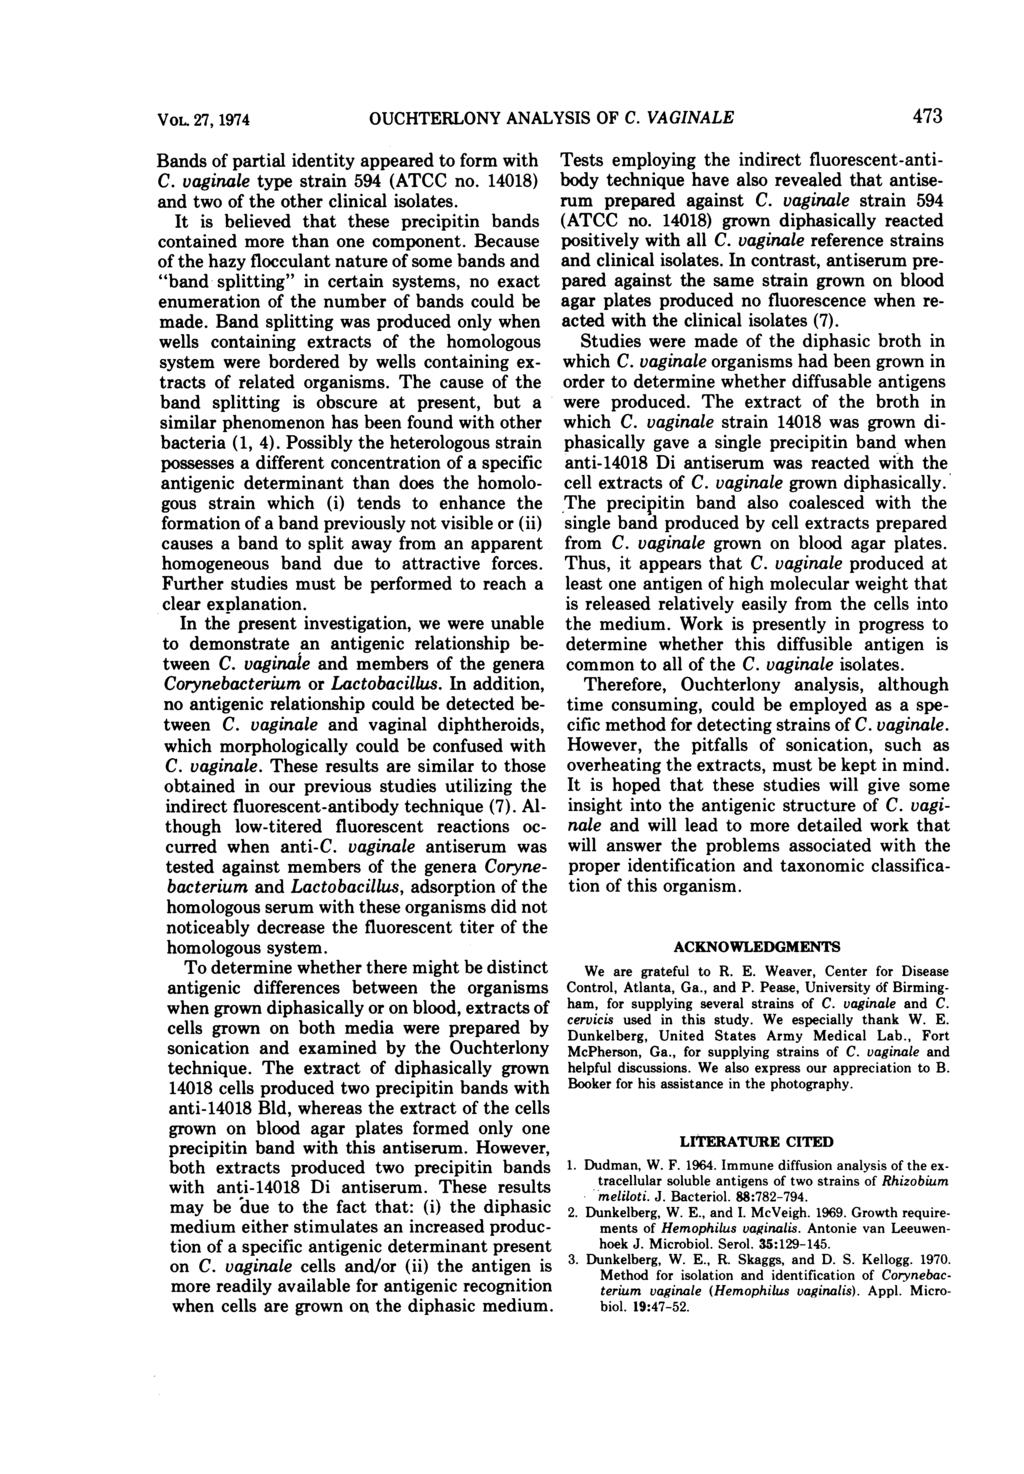 VoL 27, 1974 OUCHTERLONY ANALYSIS OF C. VAGINALE Bands of partial identity appeared to form with C. vaginale type strain 594 (ATCC no. 14018) and two of the other clinical isolates.